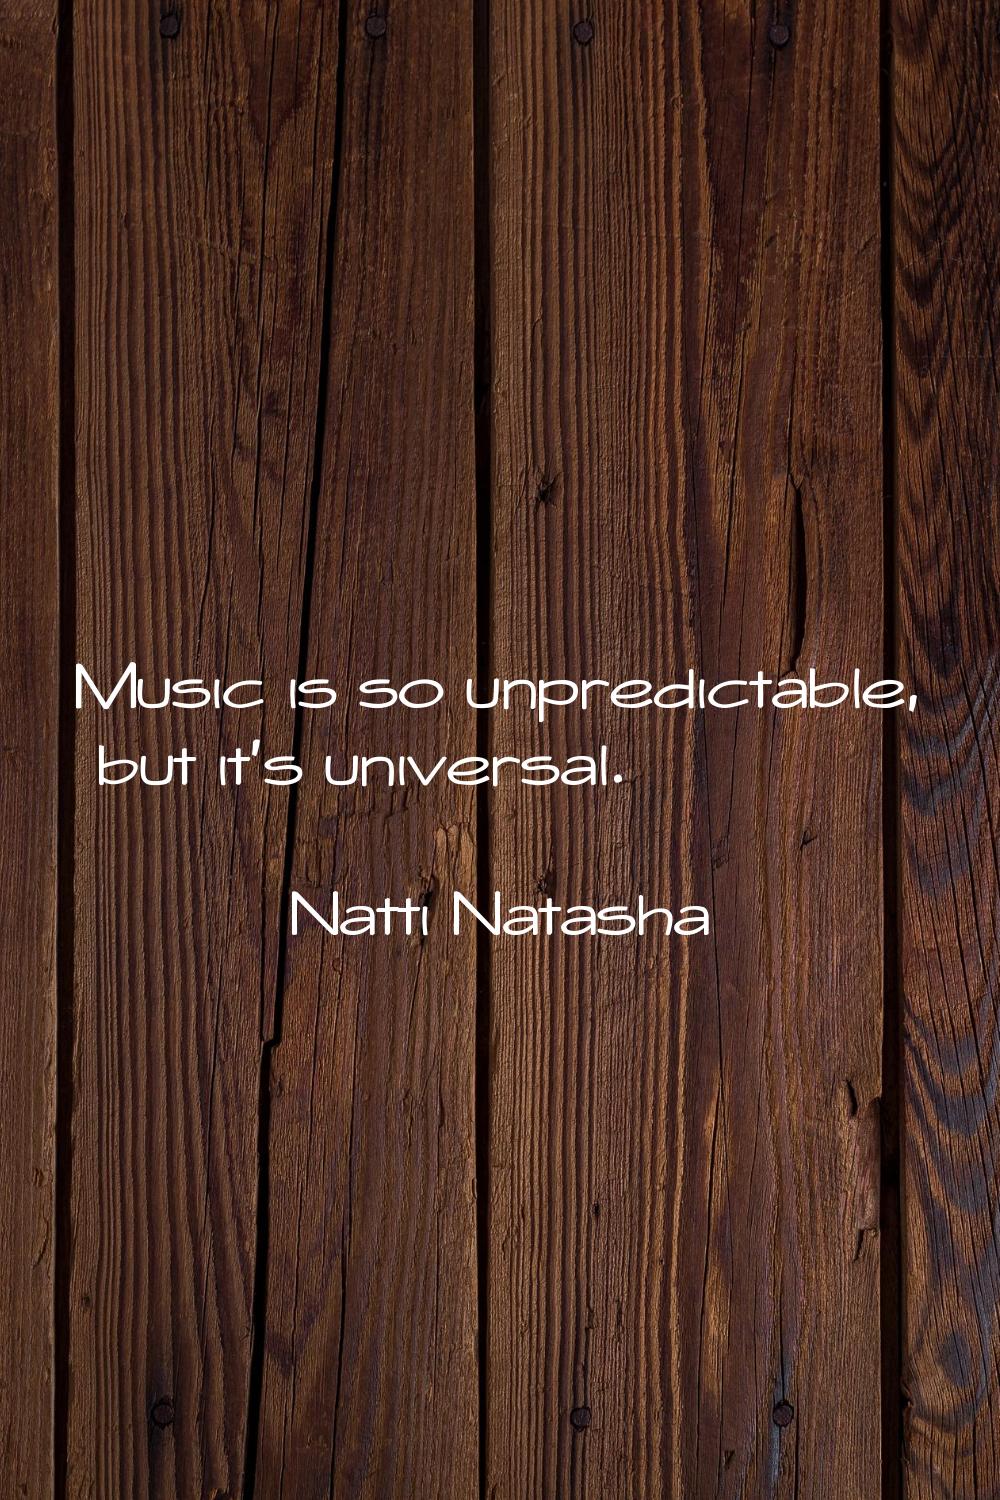 Music is so unpredictable, but it's universal.